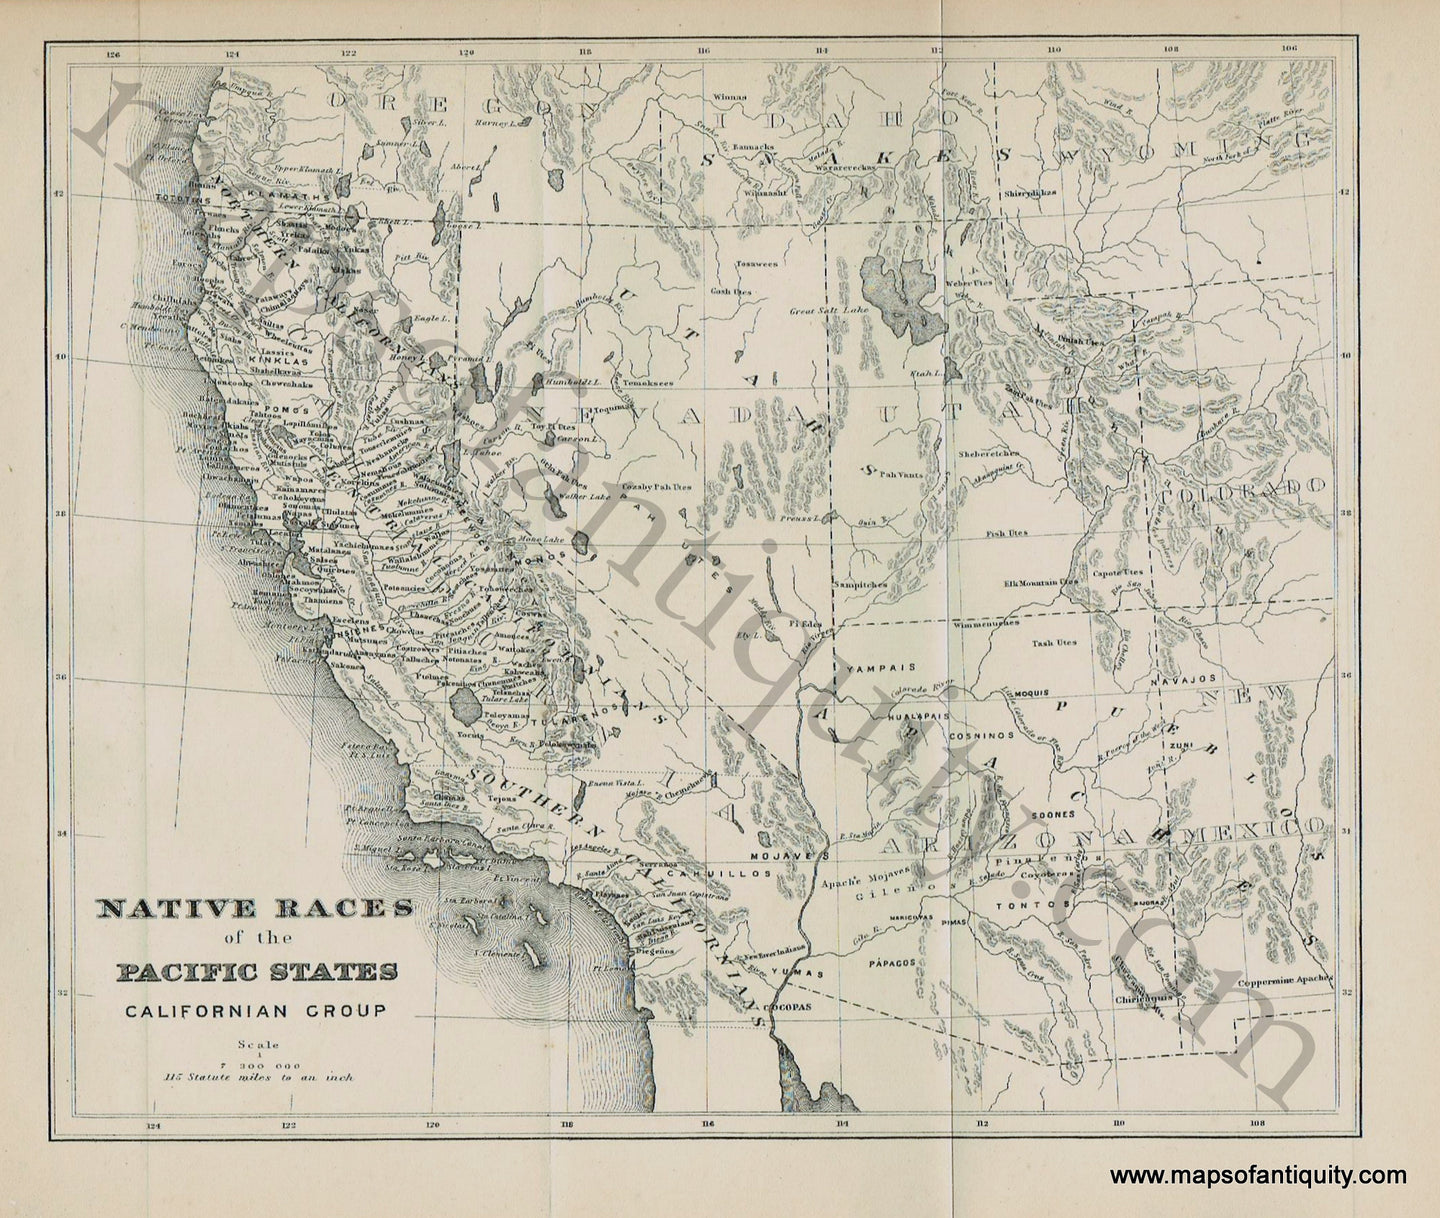 Antique-map-native-American-Indian-tribes-races-Pacific-West-California-Nevada-Utah-Arizona-US-1833-Bancroft-1880s-1800s-19th-century-Maps-of-Antiquity